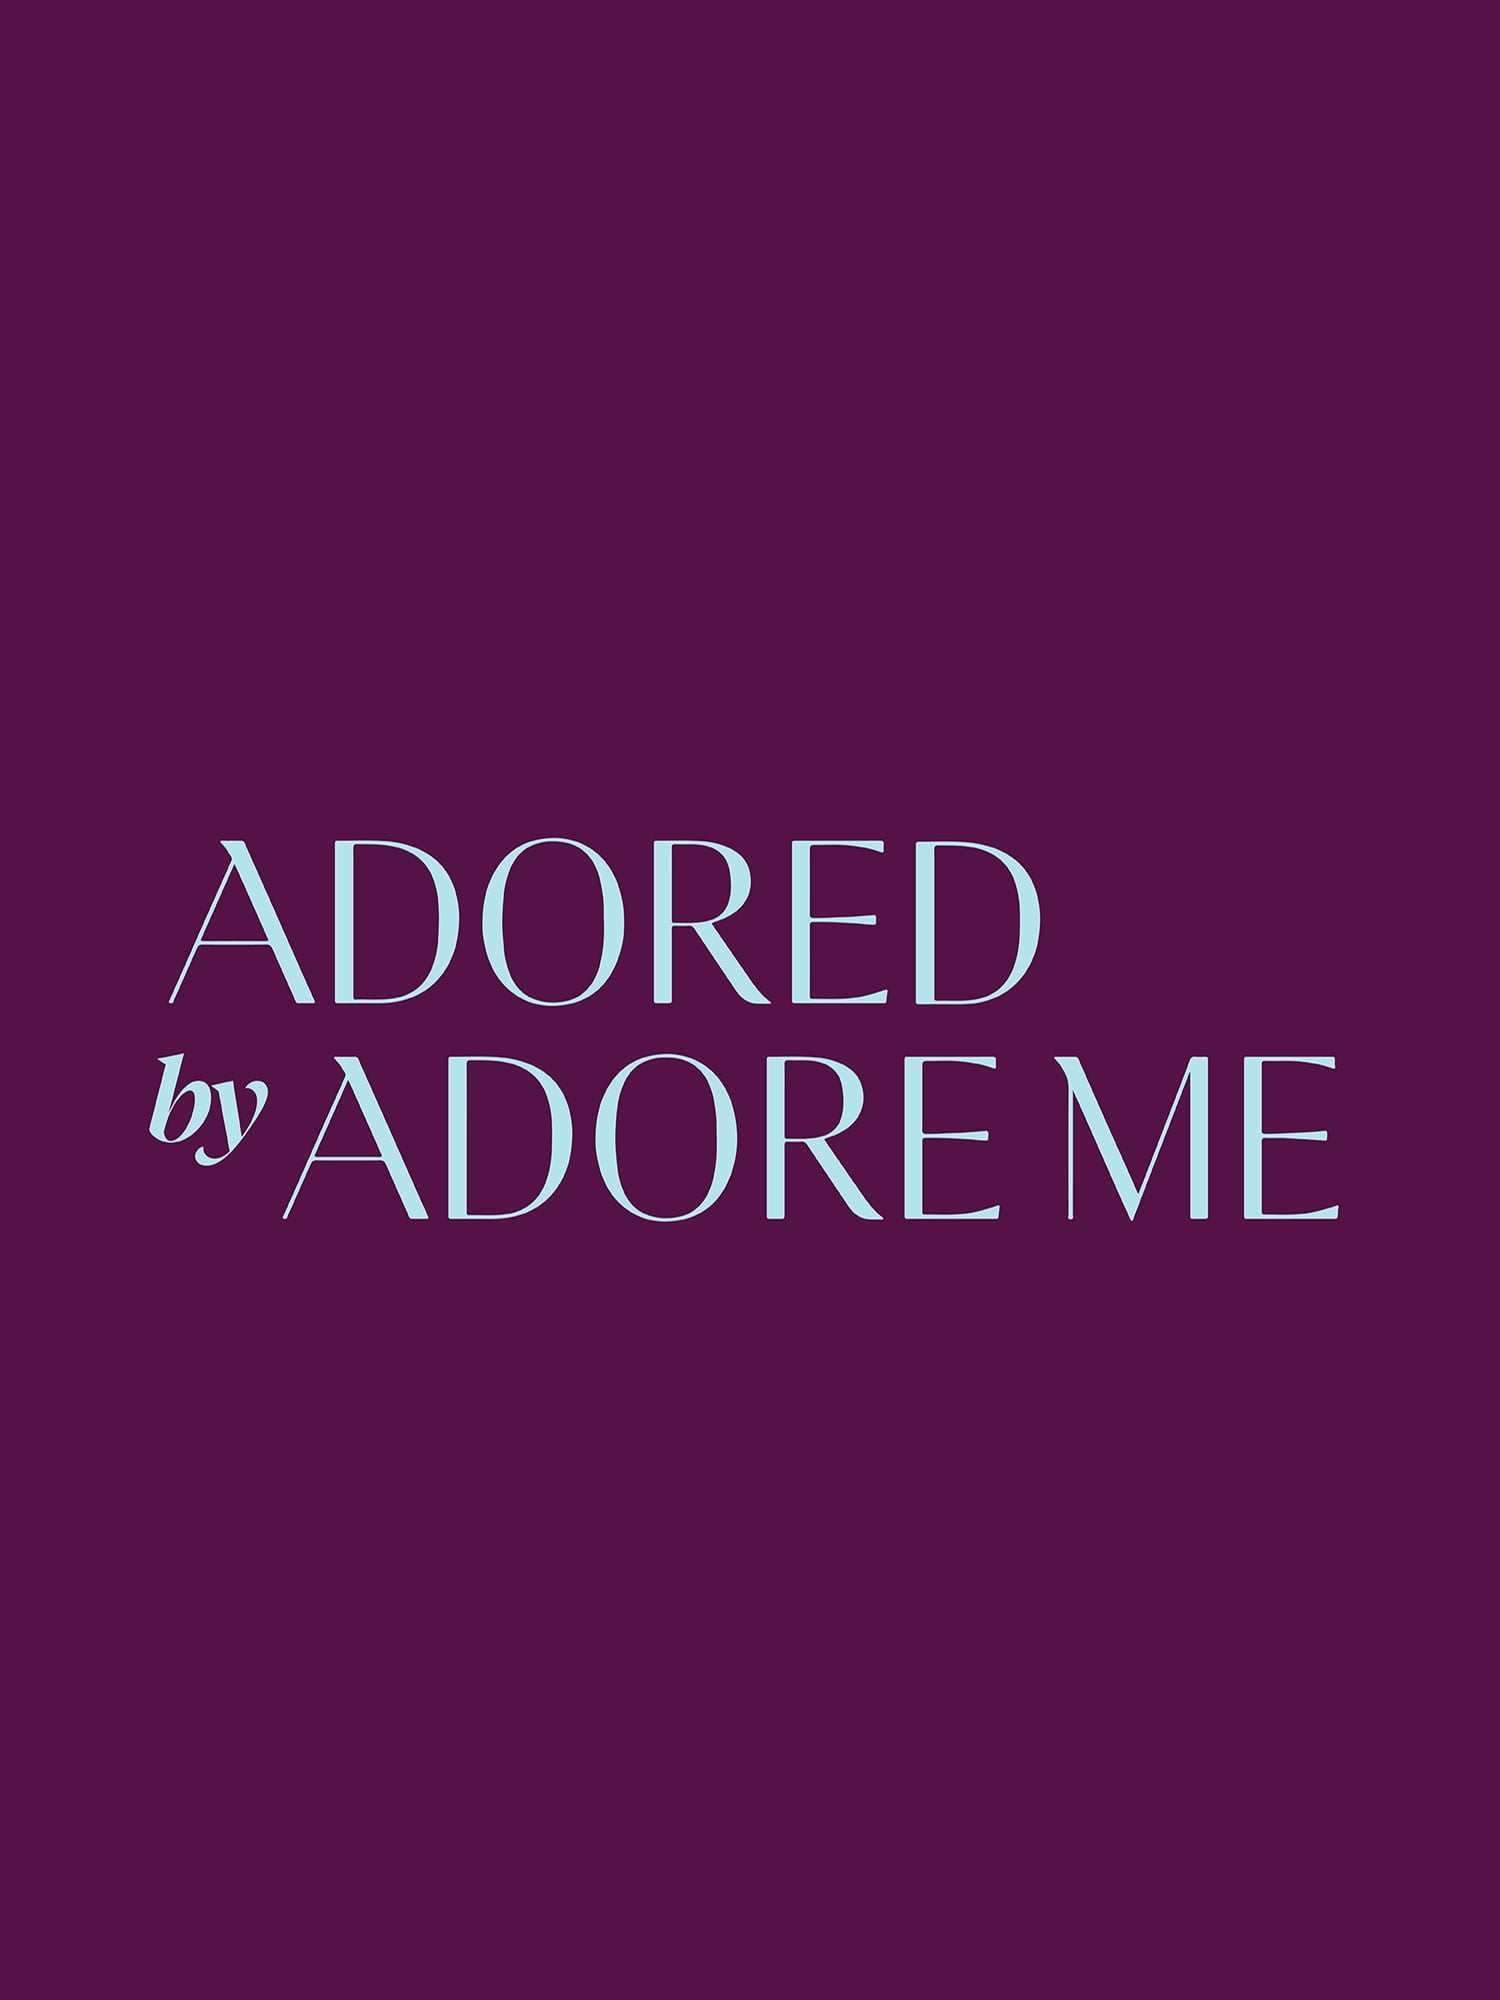 Adored by Adore Me Women's Morgan Natural Lift Lace Push Up Bra, Sizes  32B-40DD 